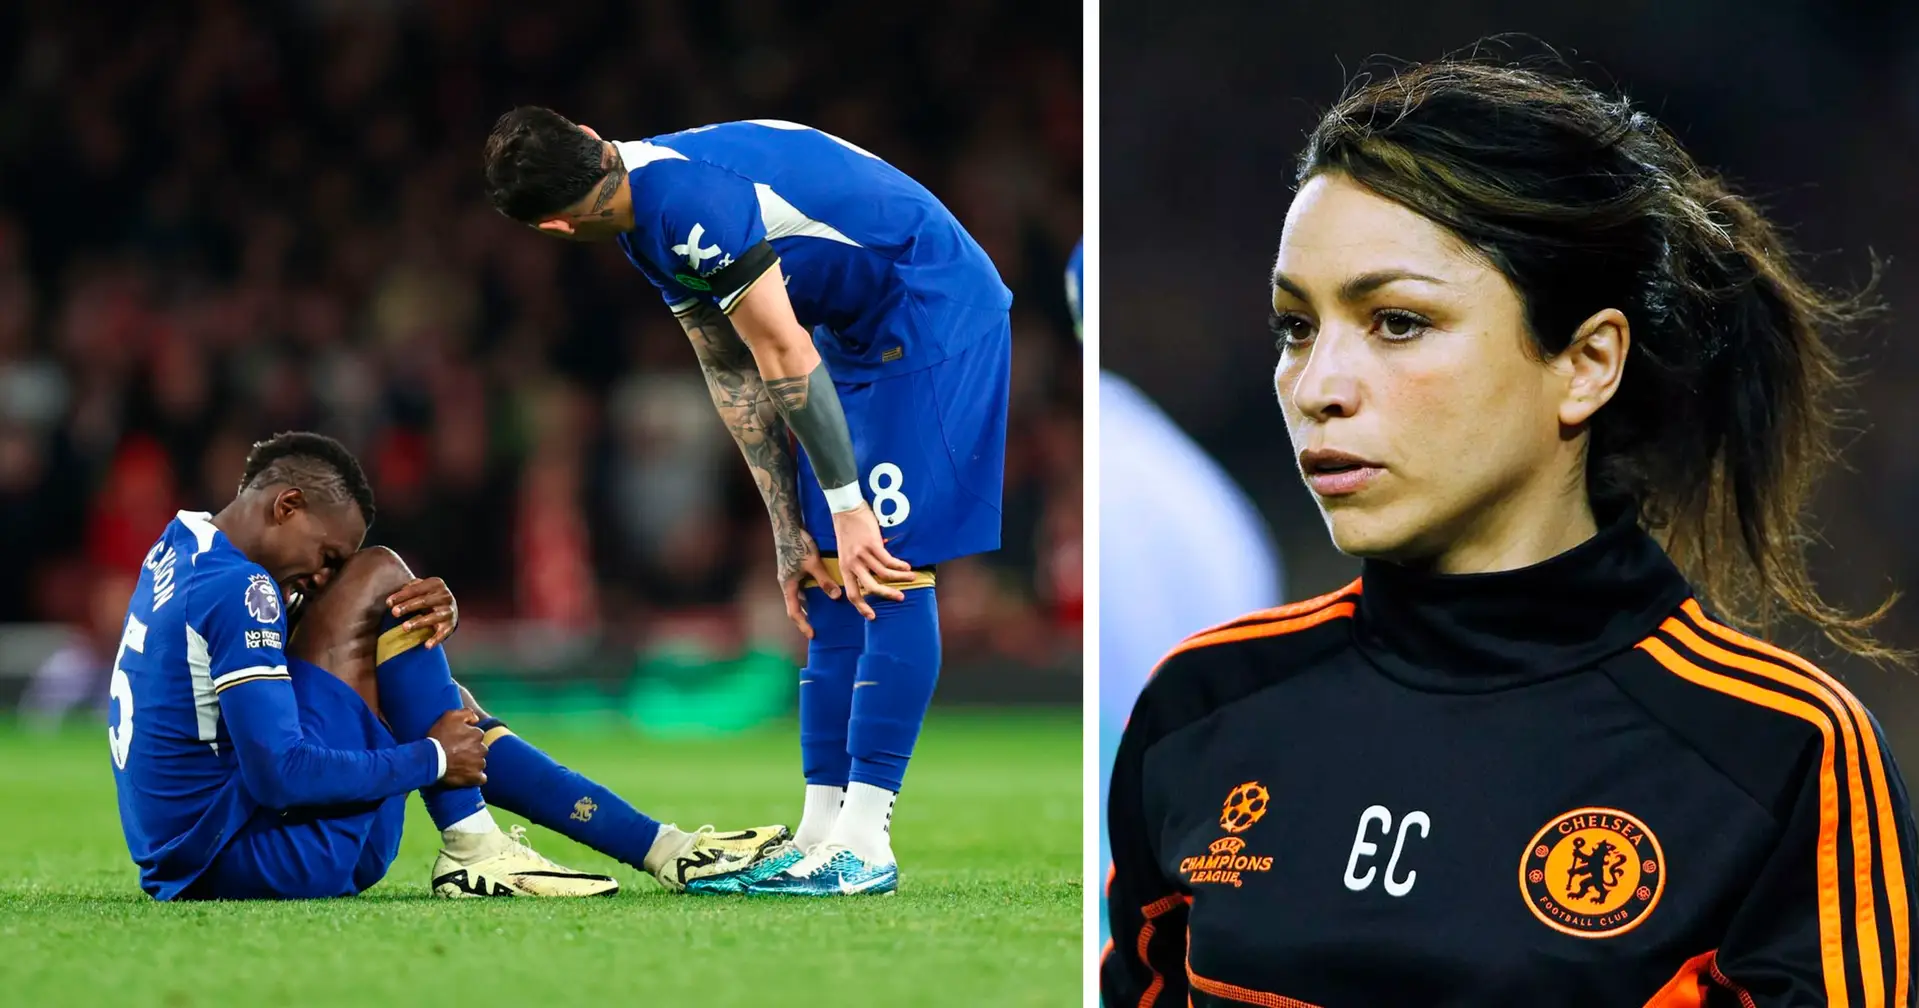 Chelsea's number of injuries in the last three season revealed - no other club in Europe had as many